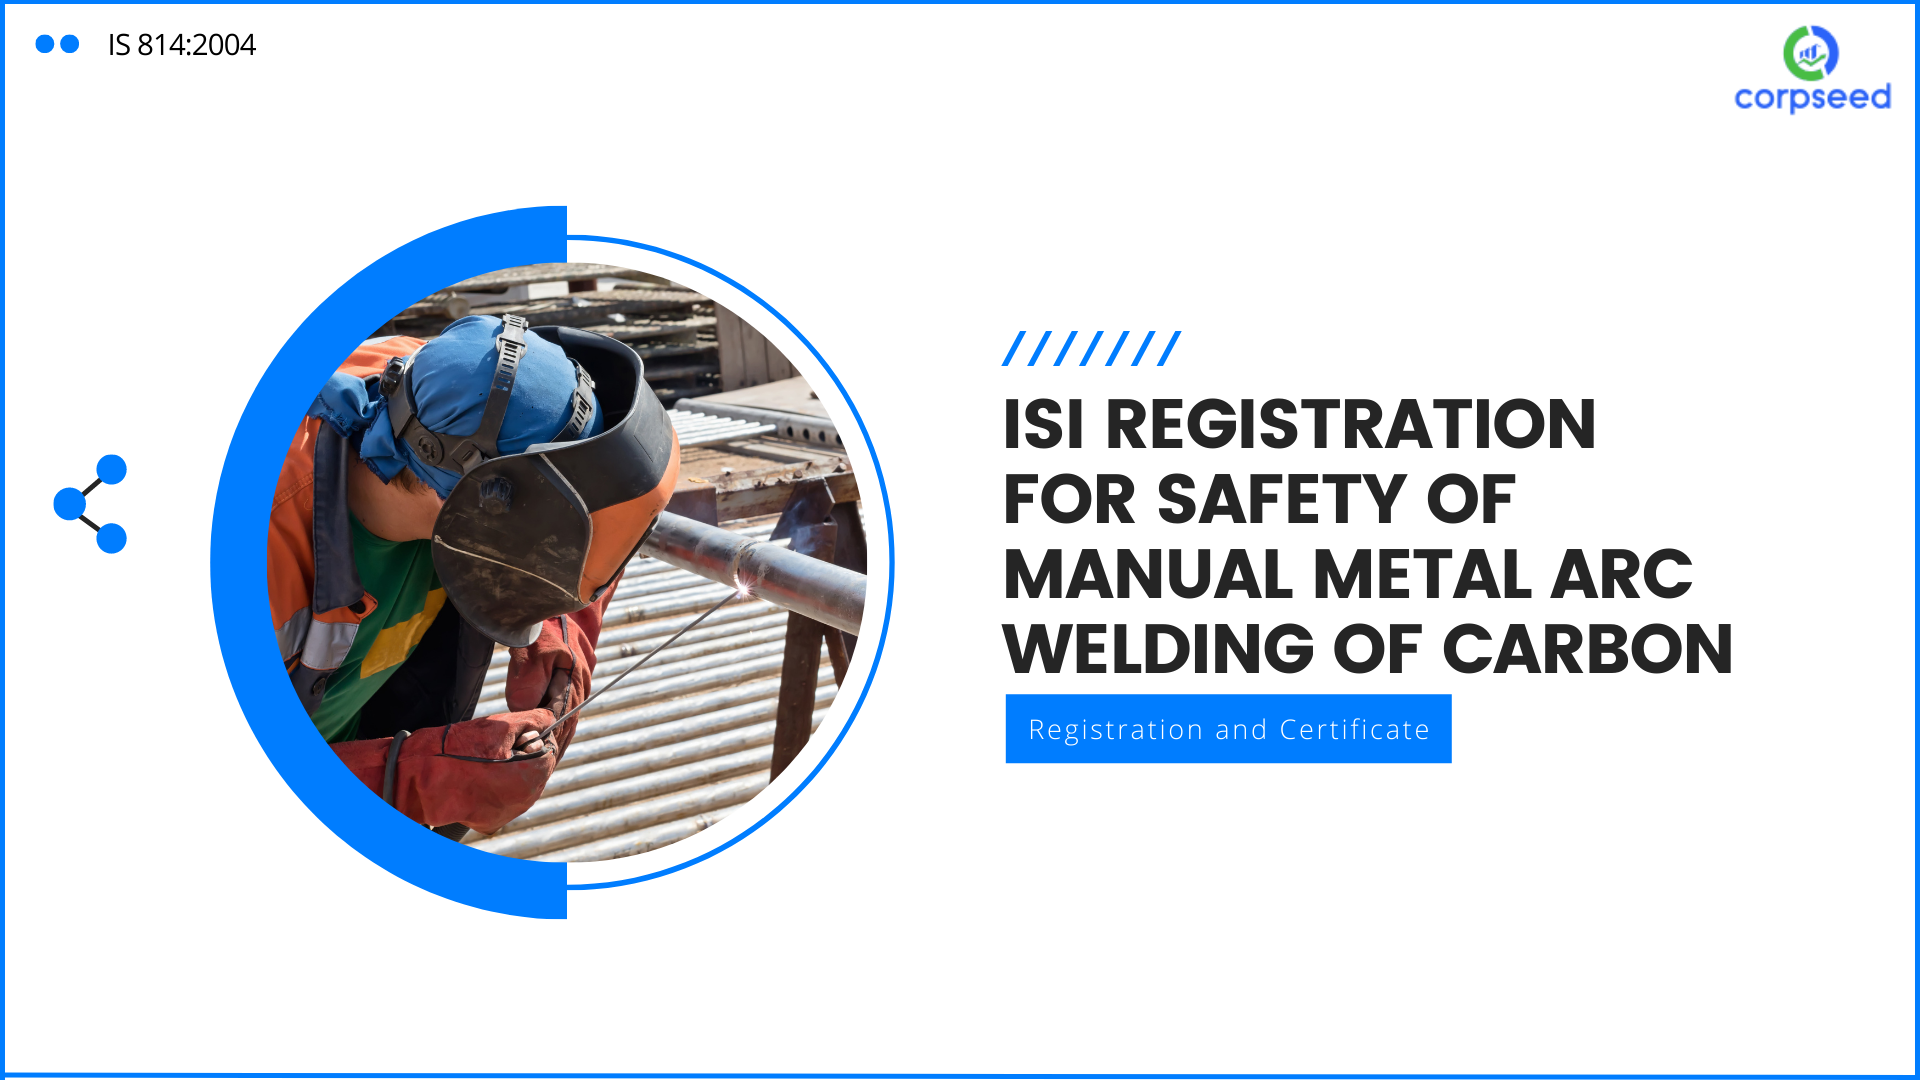 isi-registration-for-safety-of-manual-metal-arc-welding-of-carbon-is-814-2004_corpseed.png